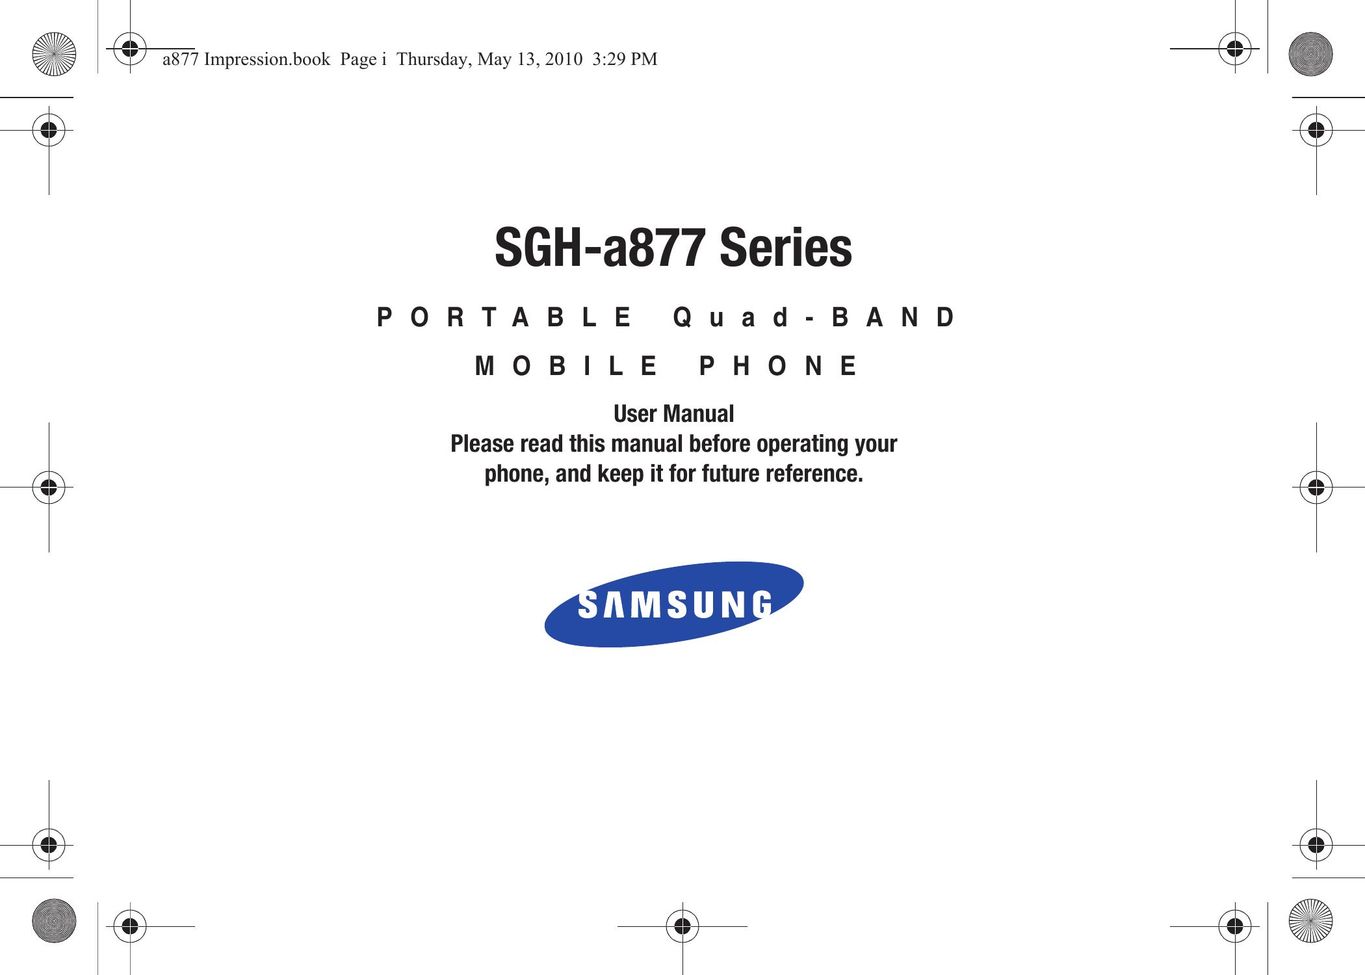 Samsung A877 Impression Cell Phone User Manual